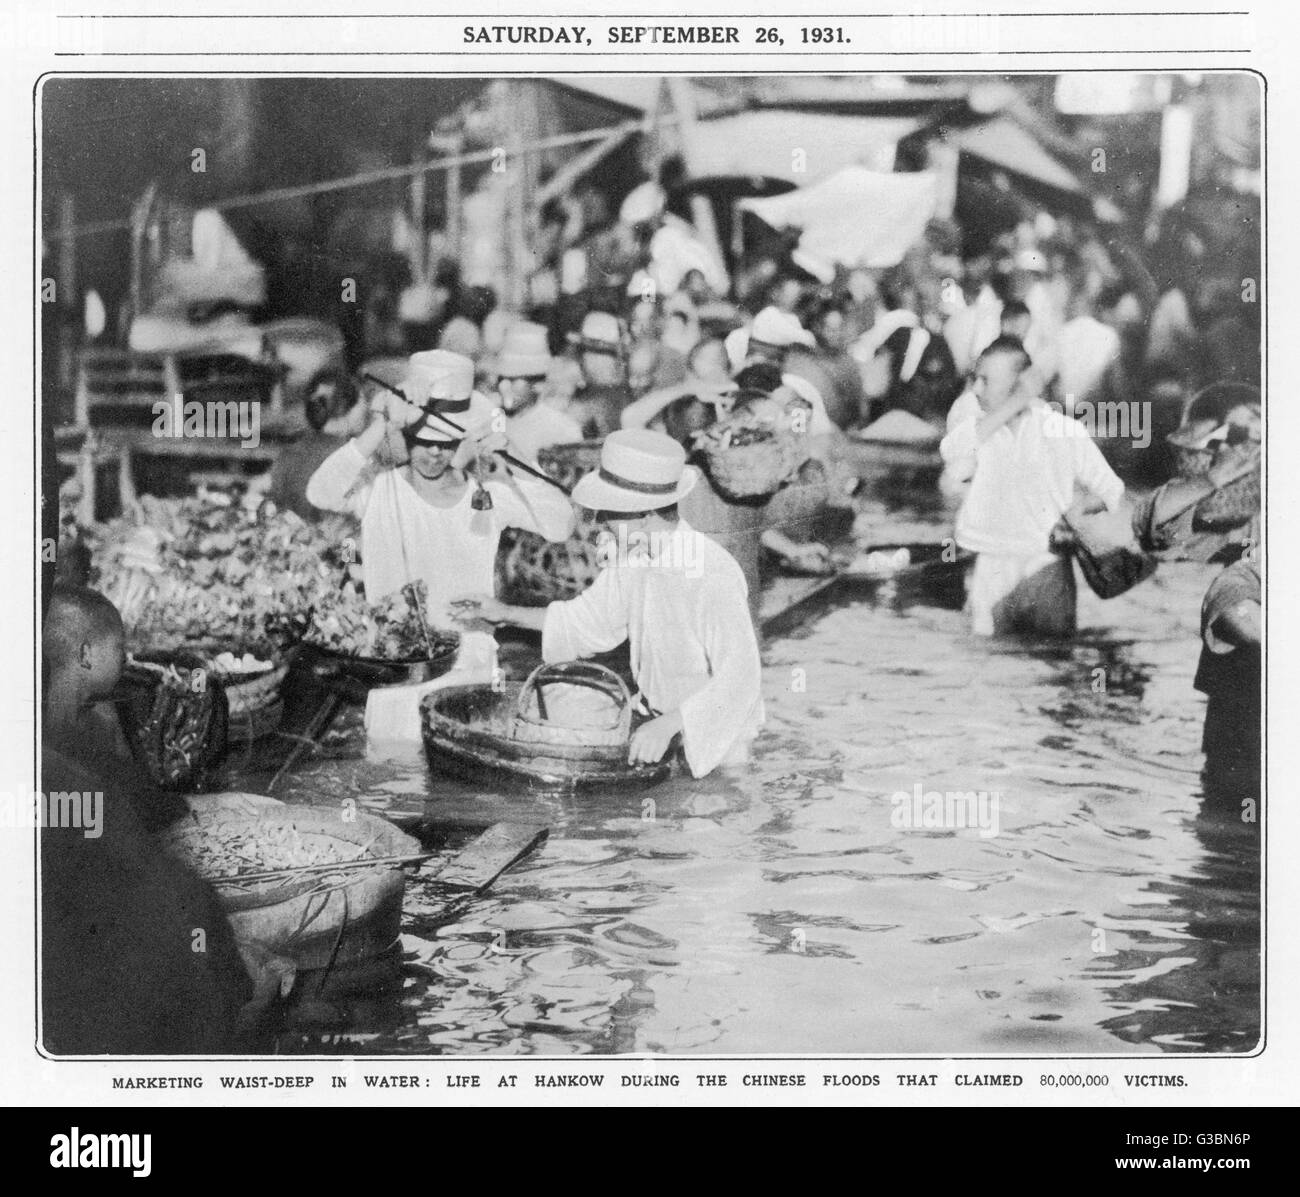 Marketing waist-deep in water,  life at Hankow during the  flood from the Yangtze river        Date: 26 September 1931 Stock Photo